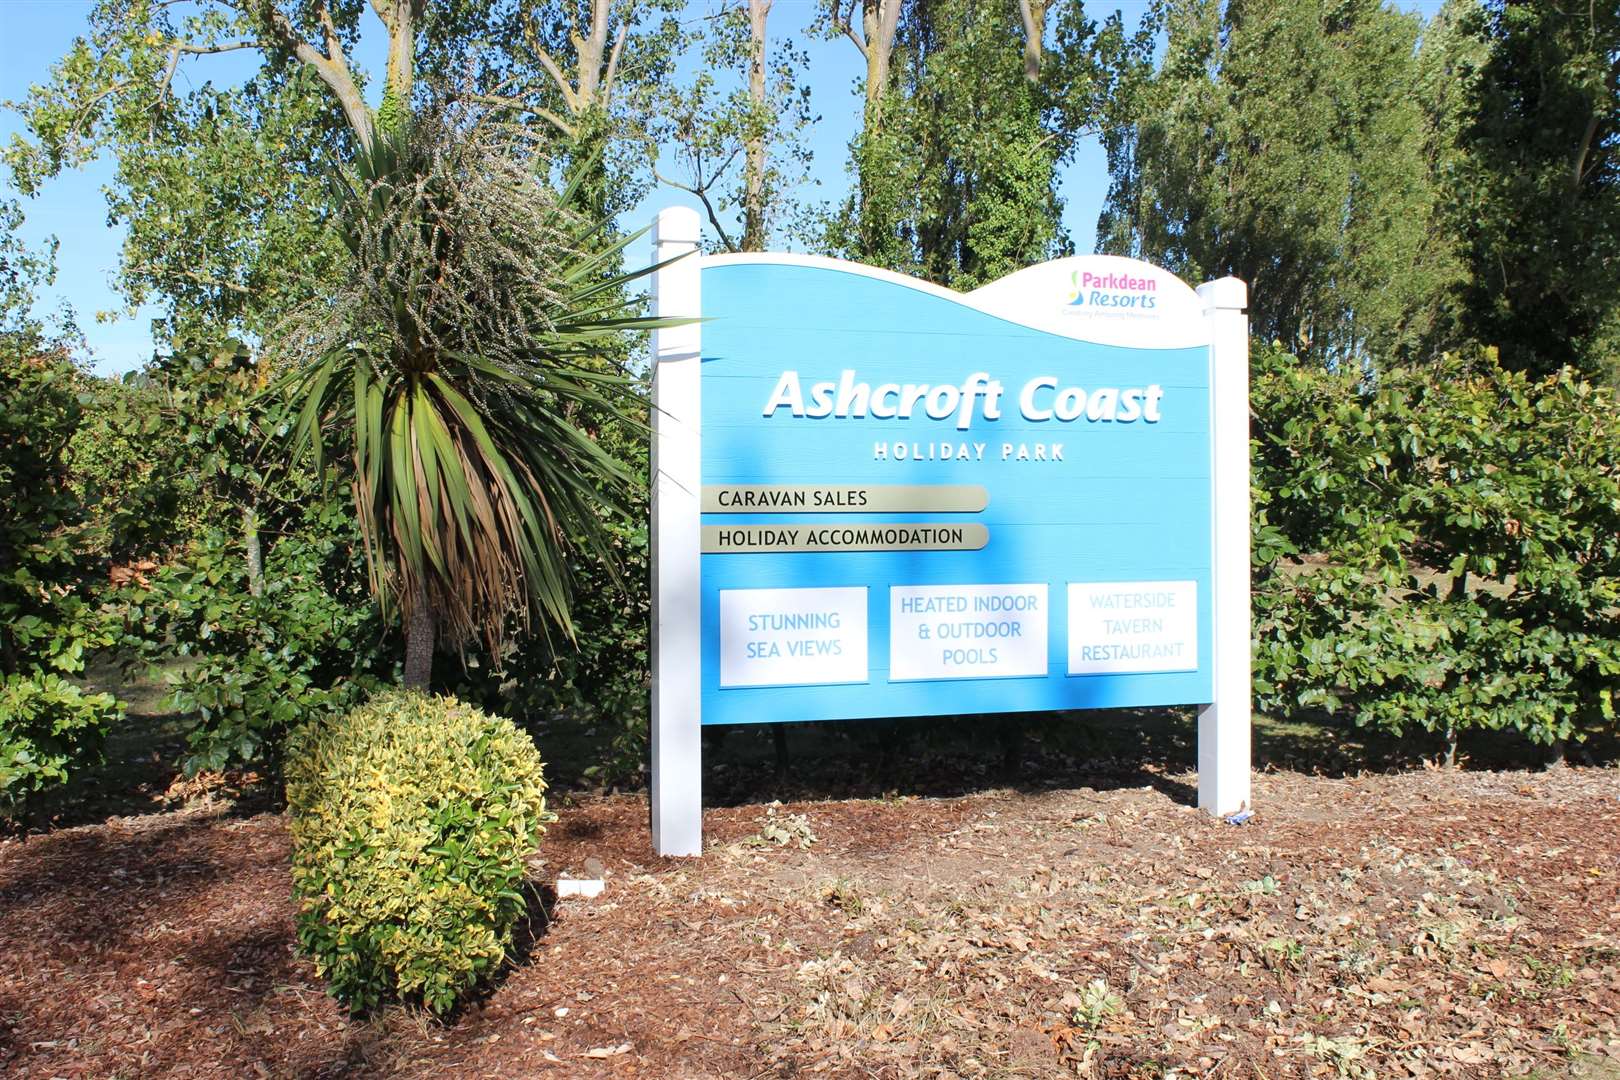 Ashcroft Coast Holiday Park, Plough Lane, Minster, owned by Cosgrove Leisure